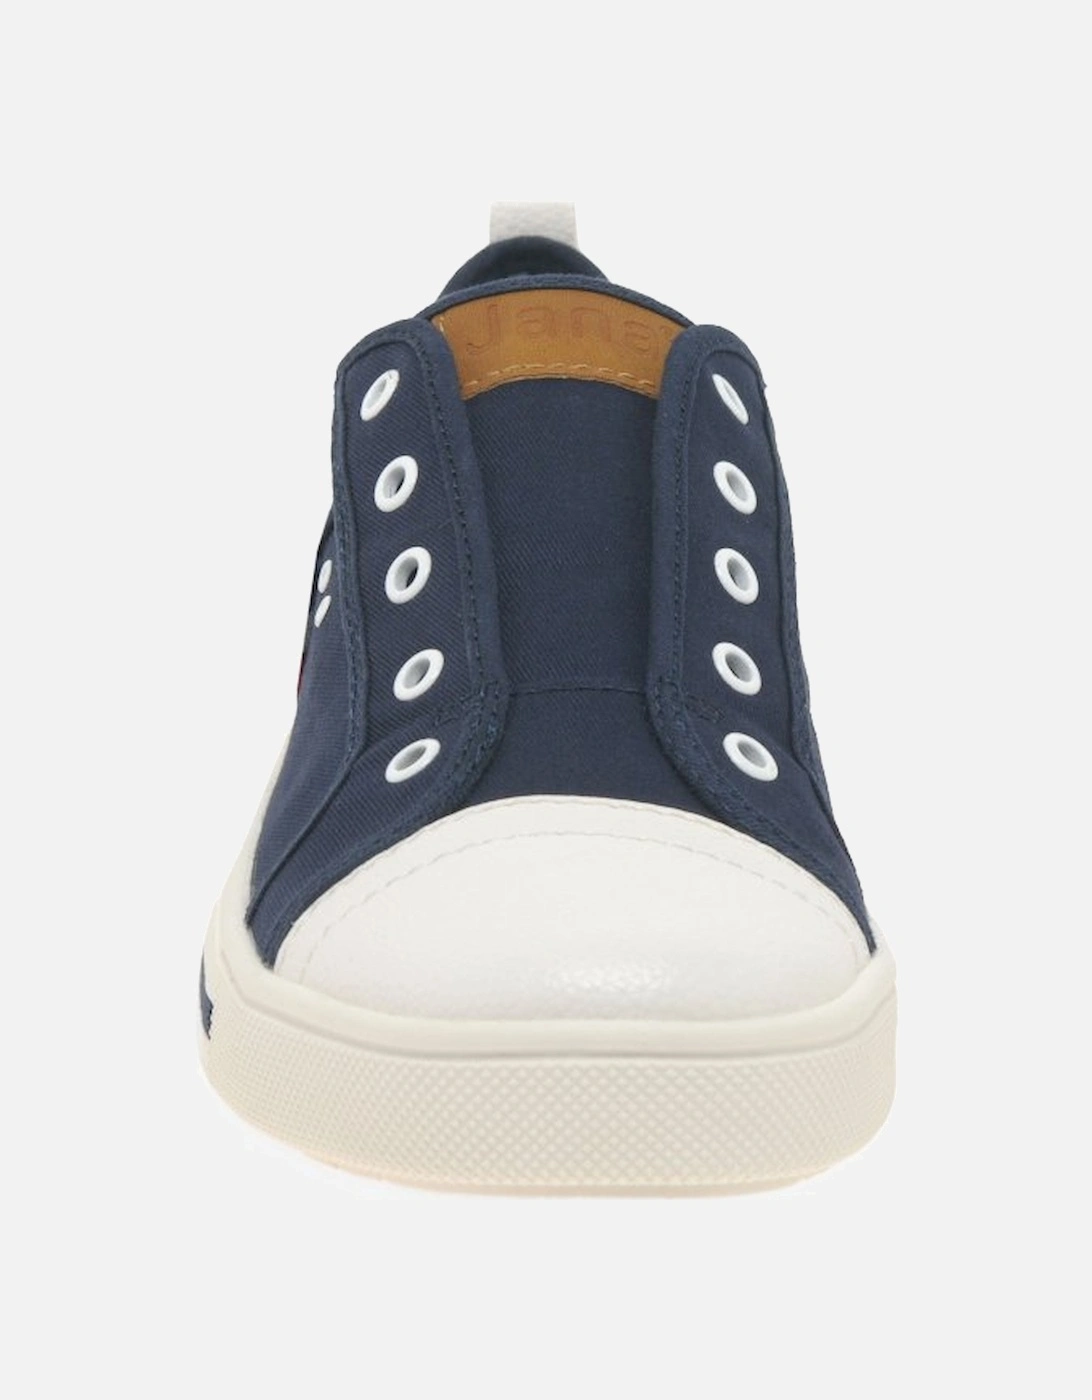 Anchor Womens Canvas Shoes